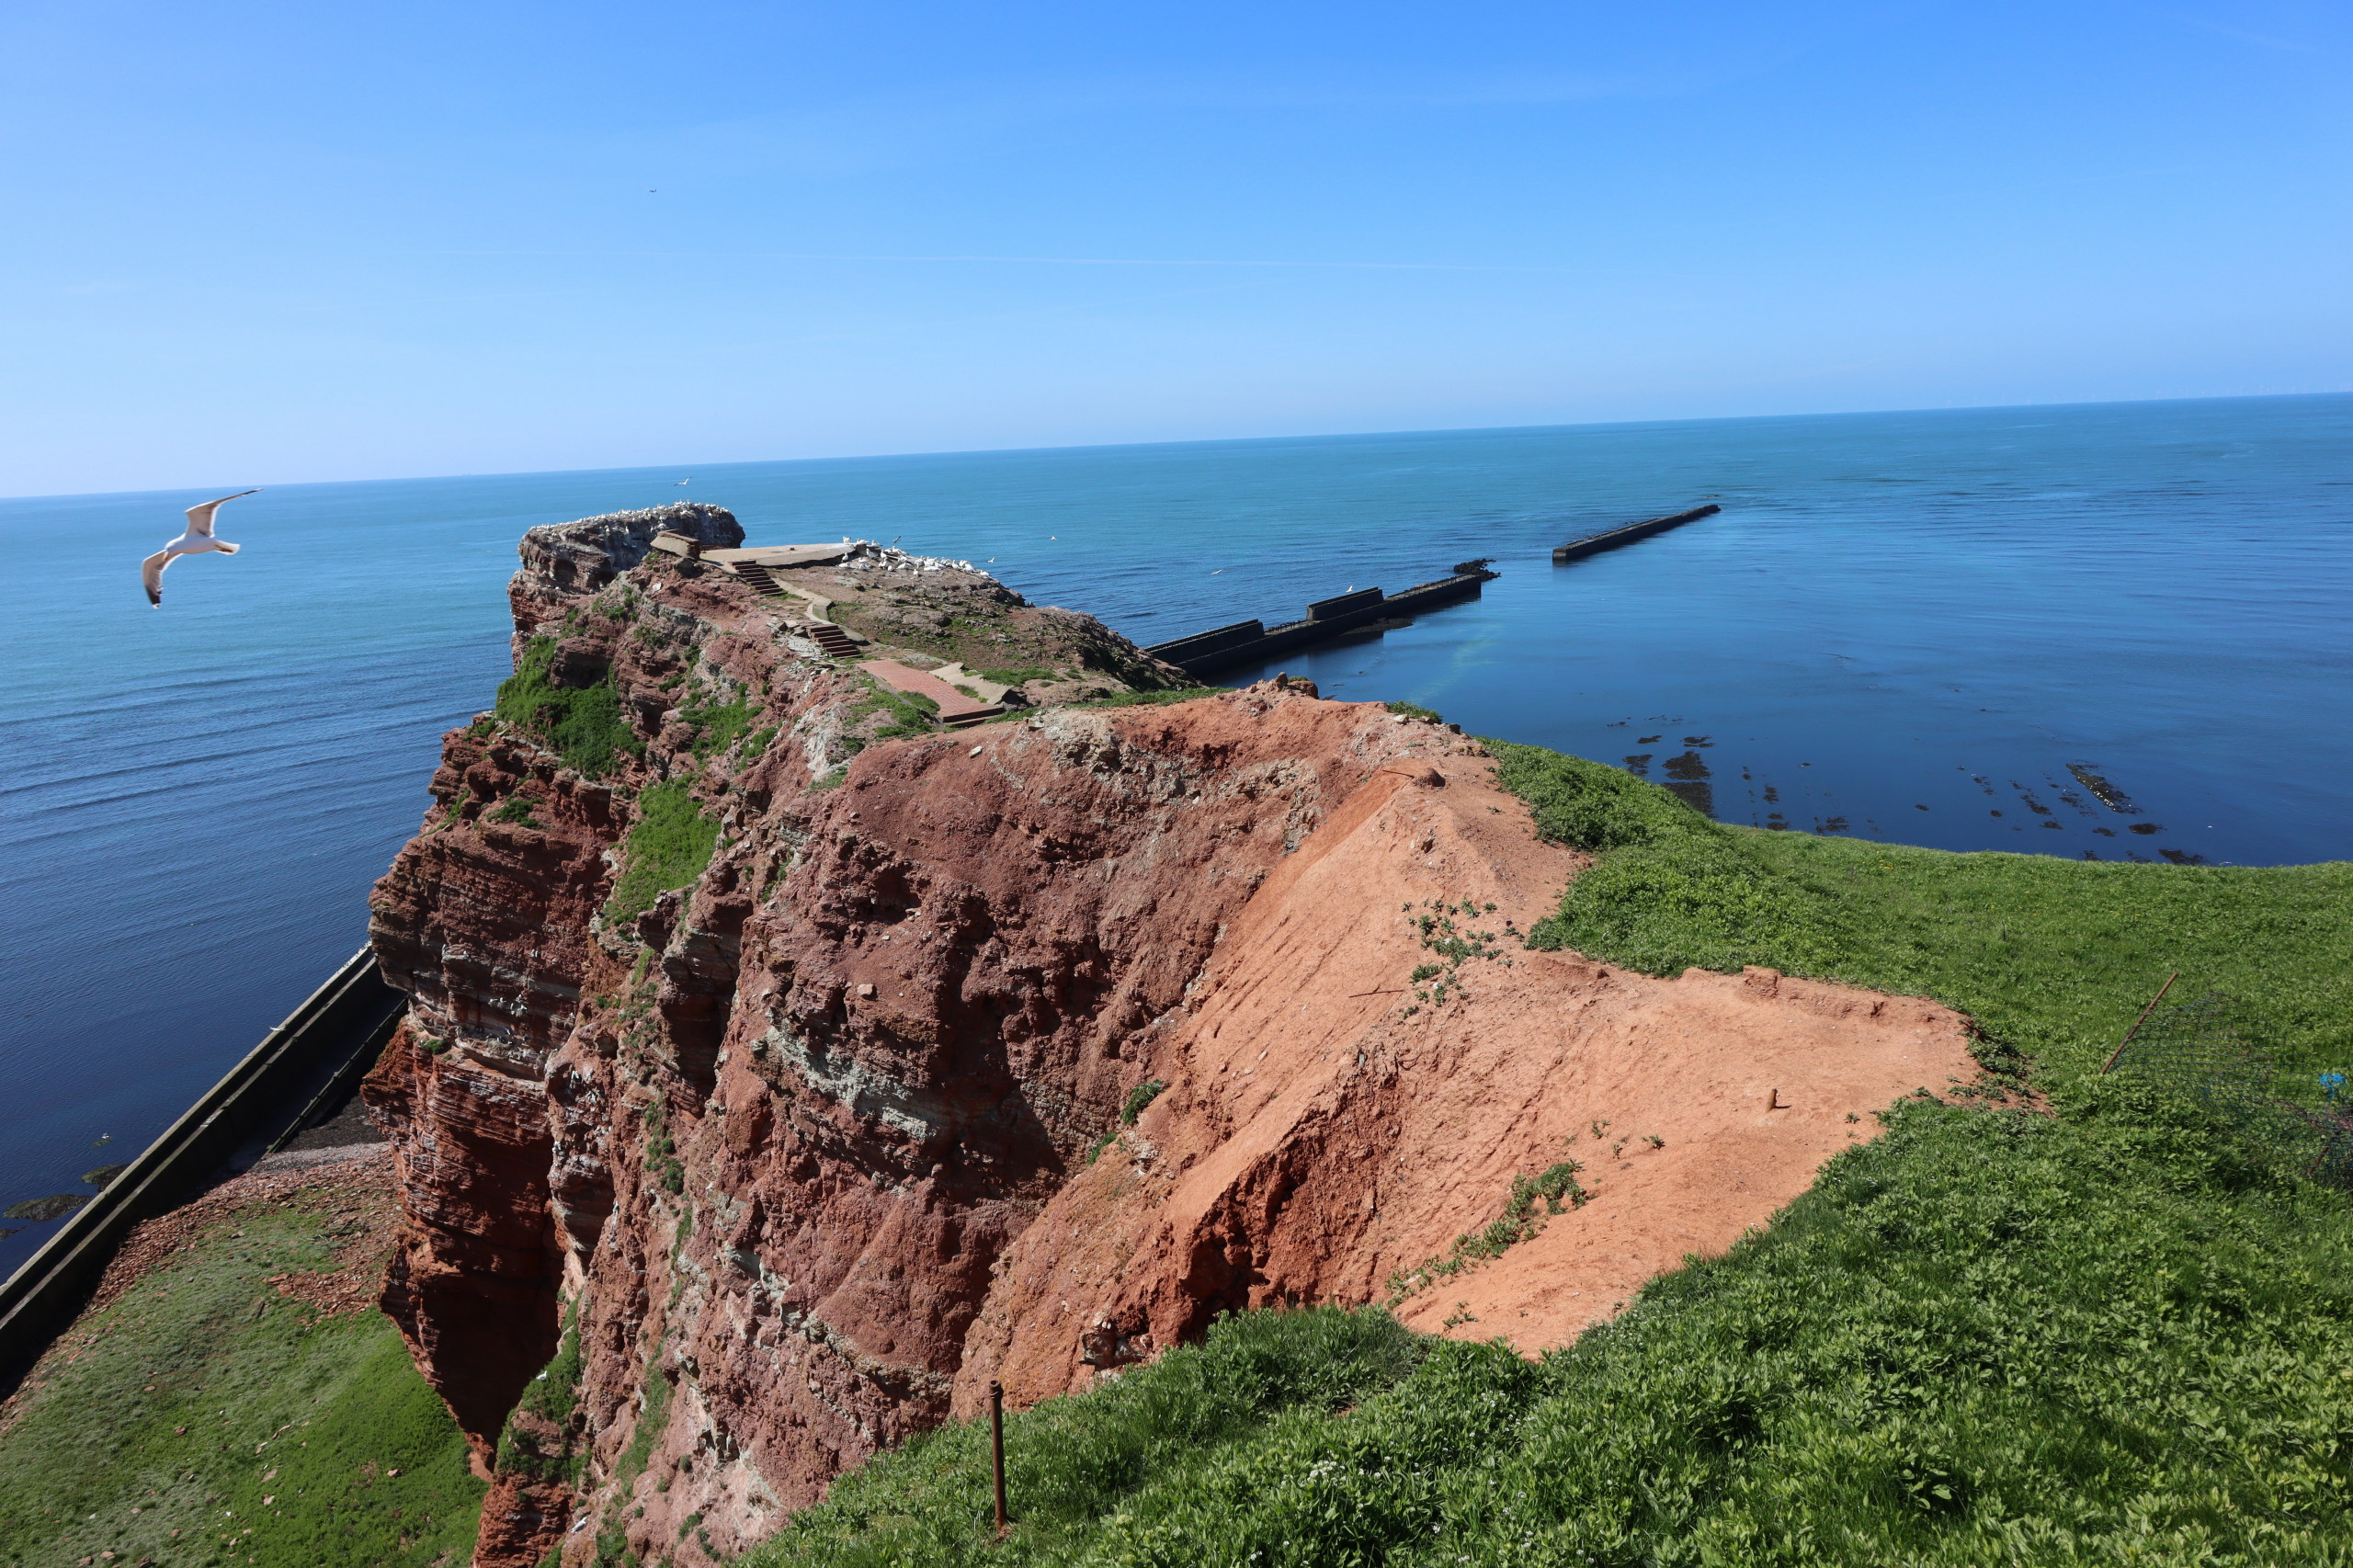 A Day on Helgoland